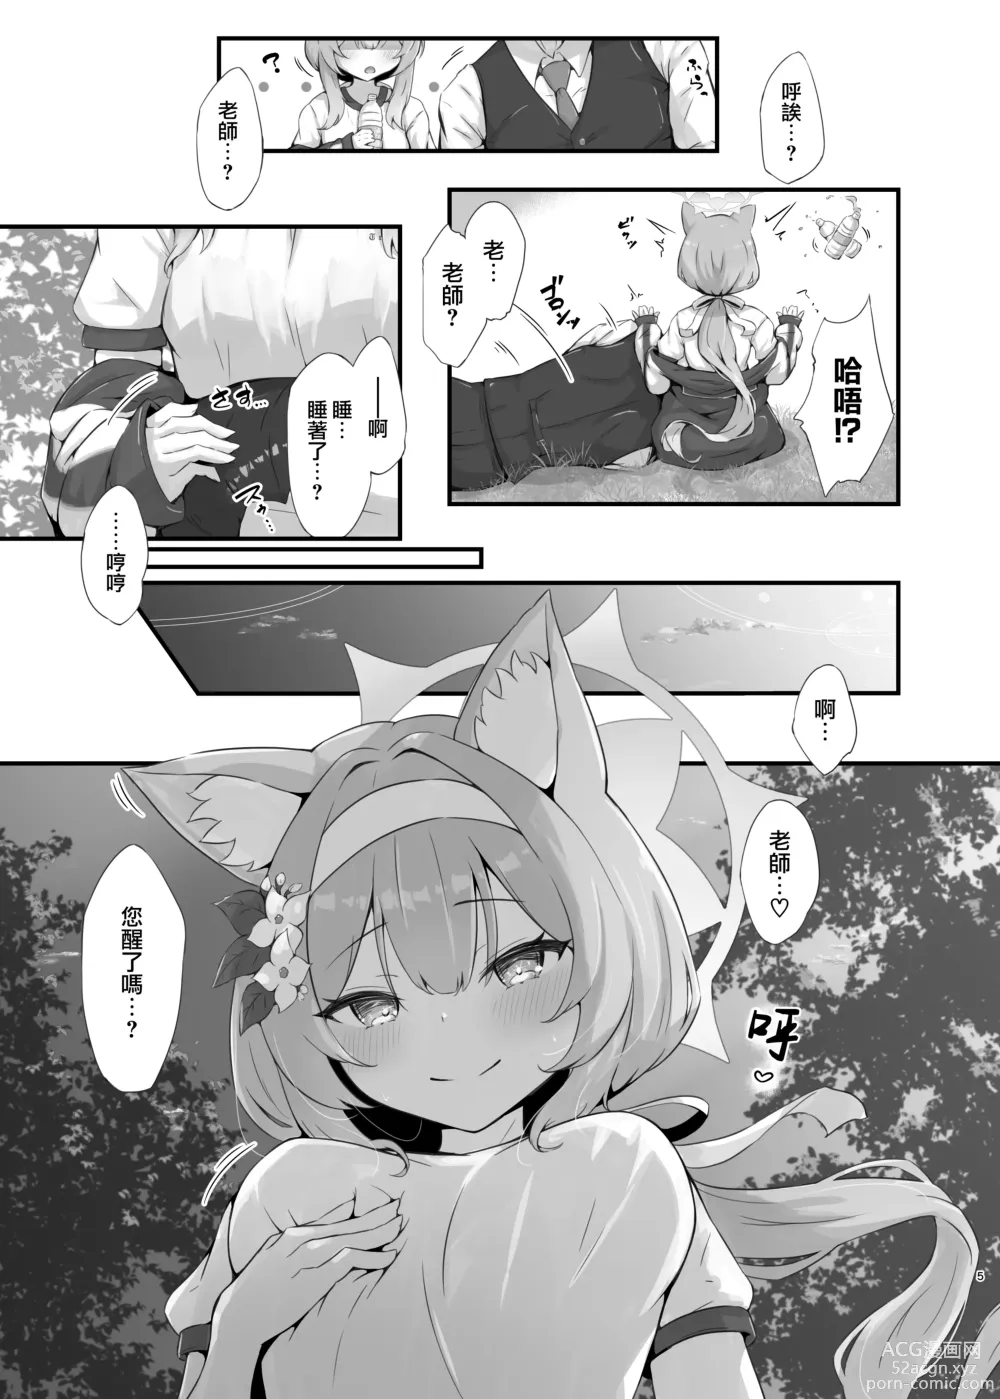 Page 6 of doujinshi 吸瑪麗